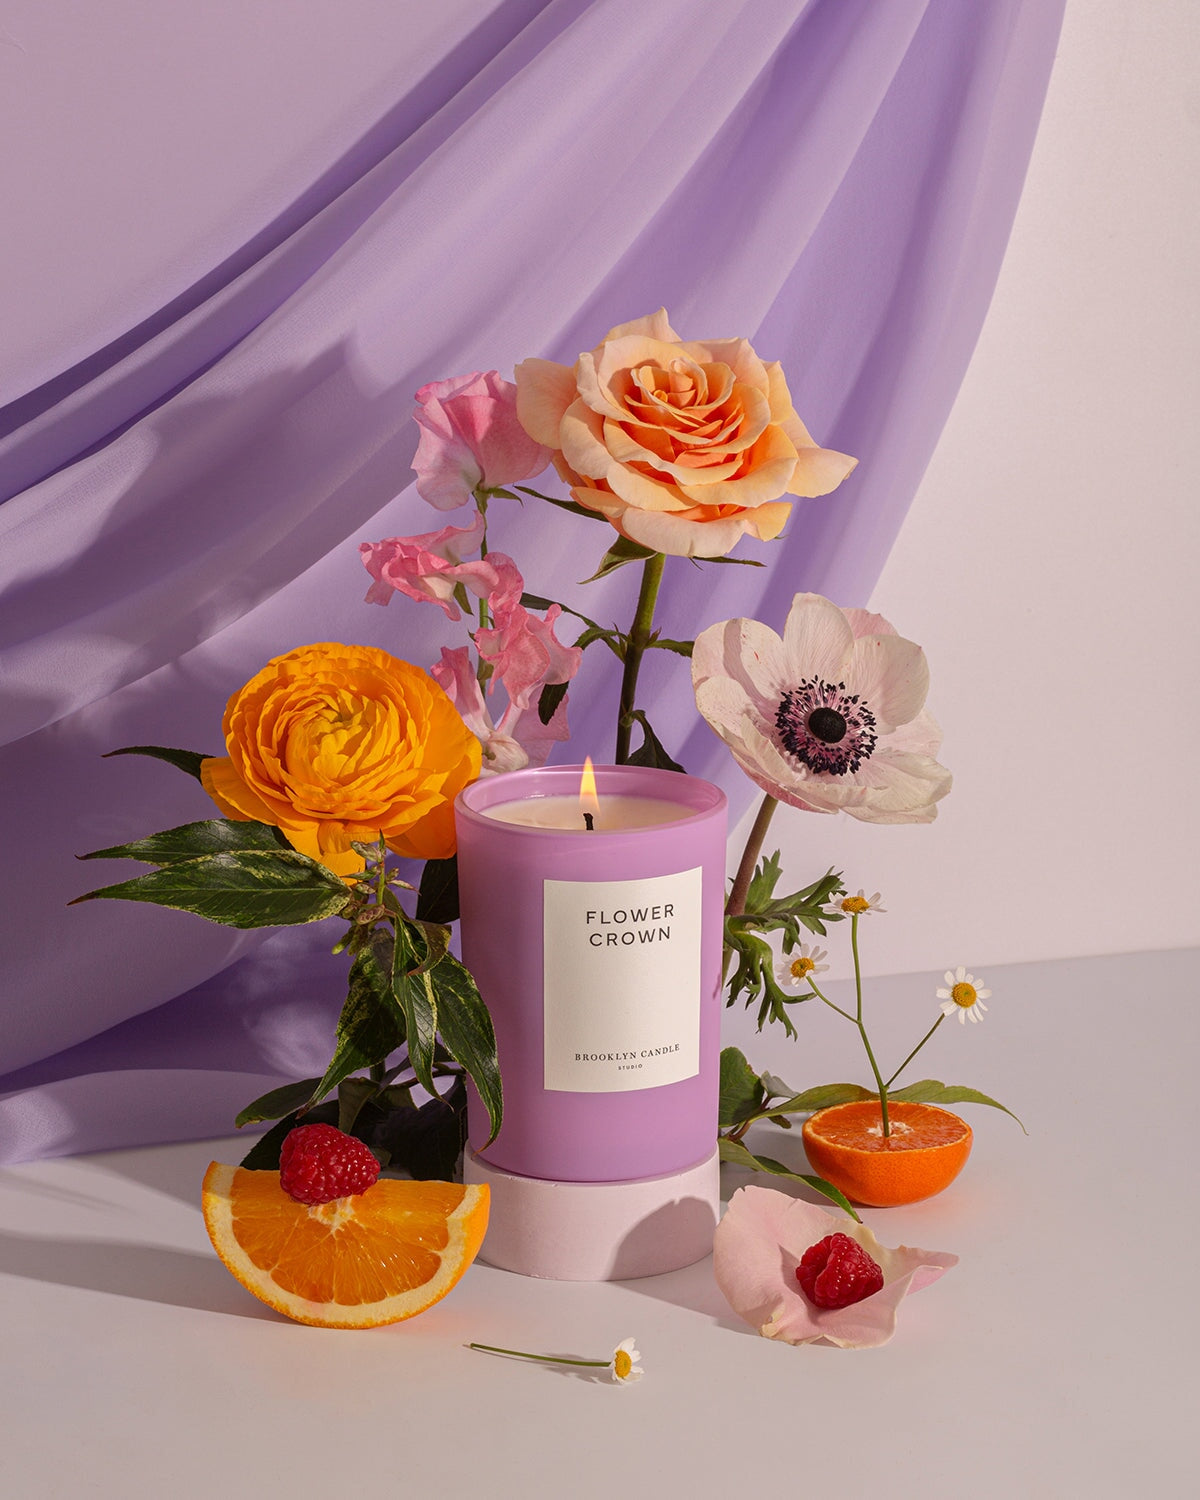 Flower Crown Limited Edition Candle Lilac Haze Collection Brooklyn Candle Studio 